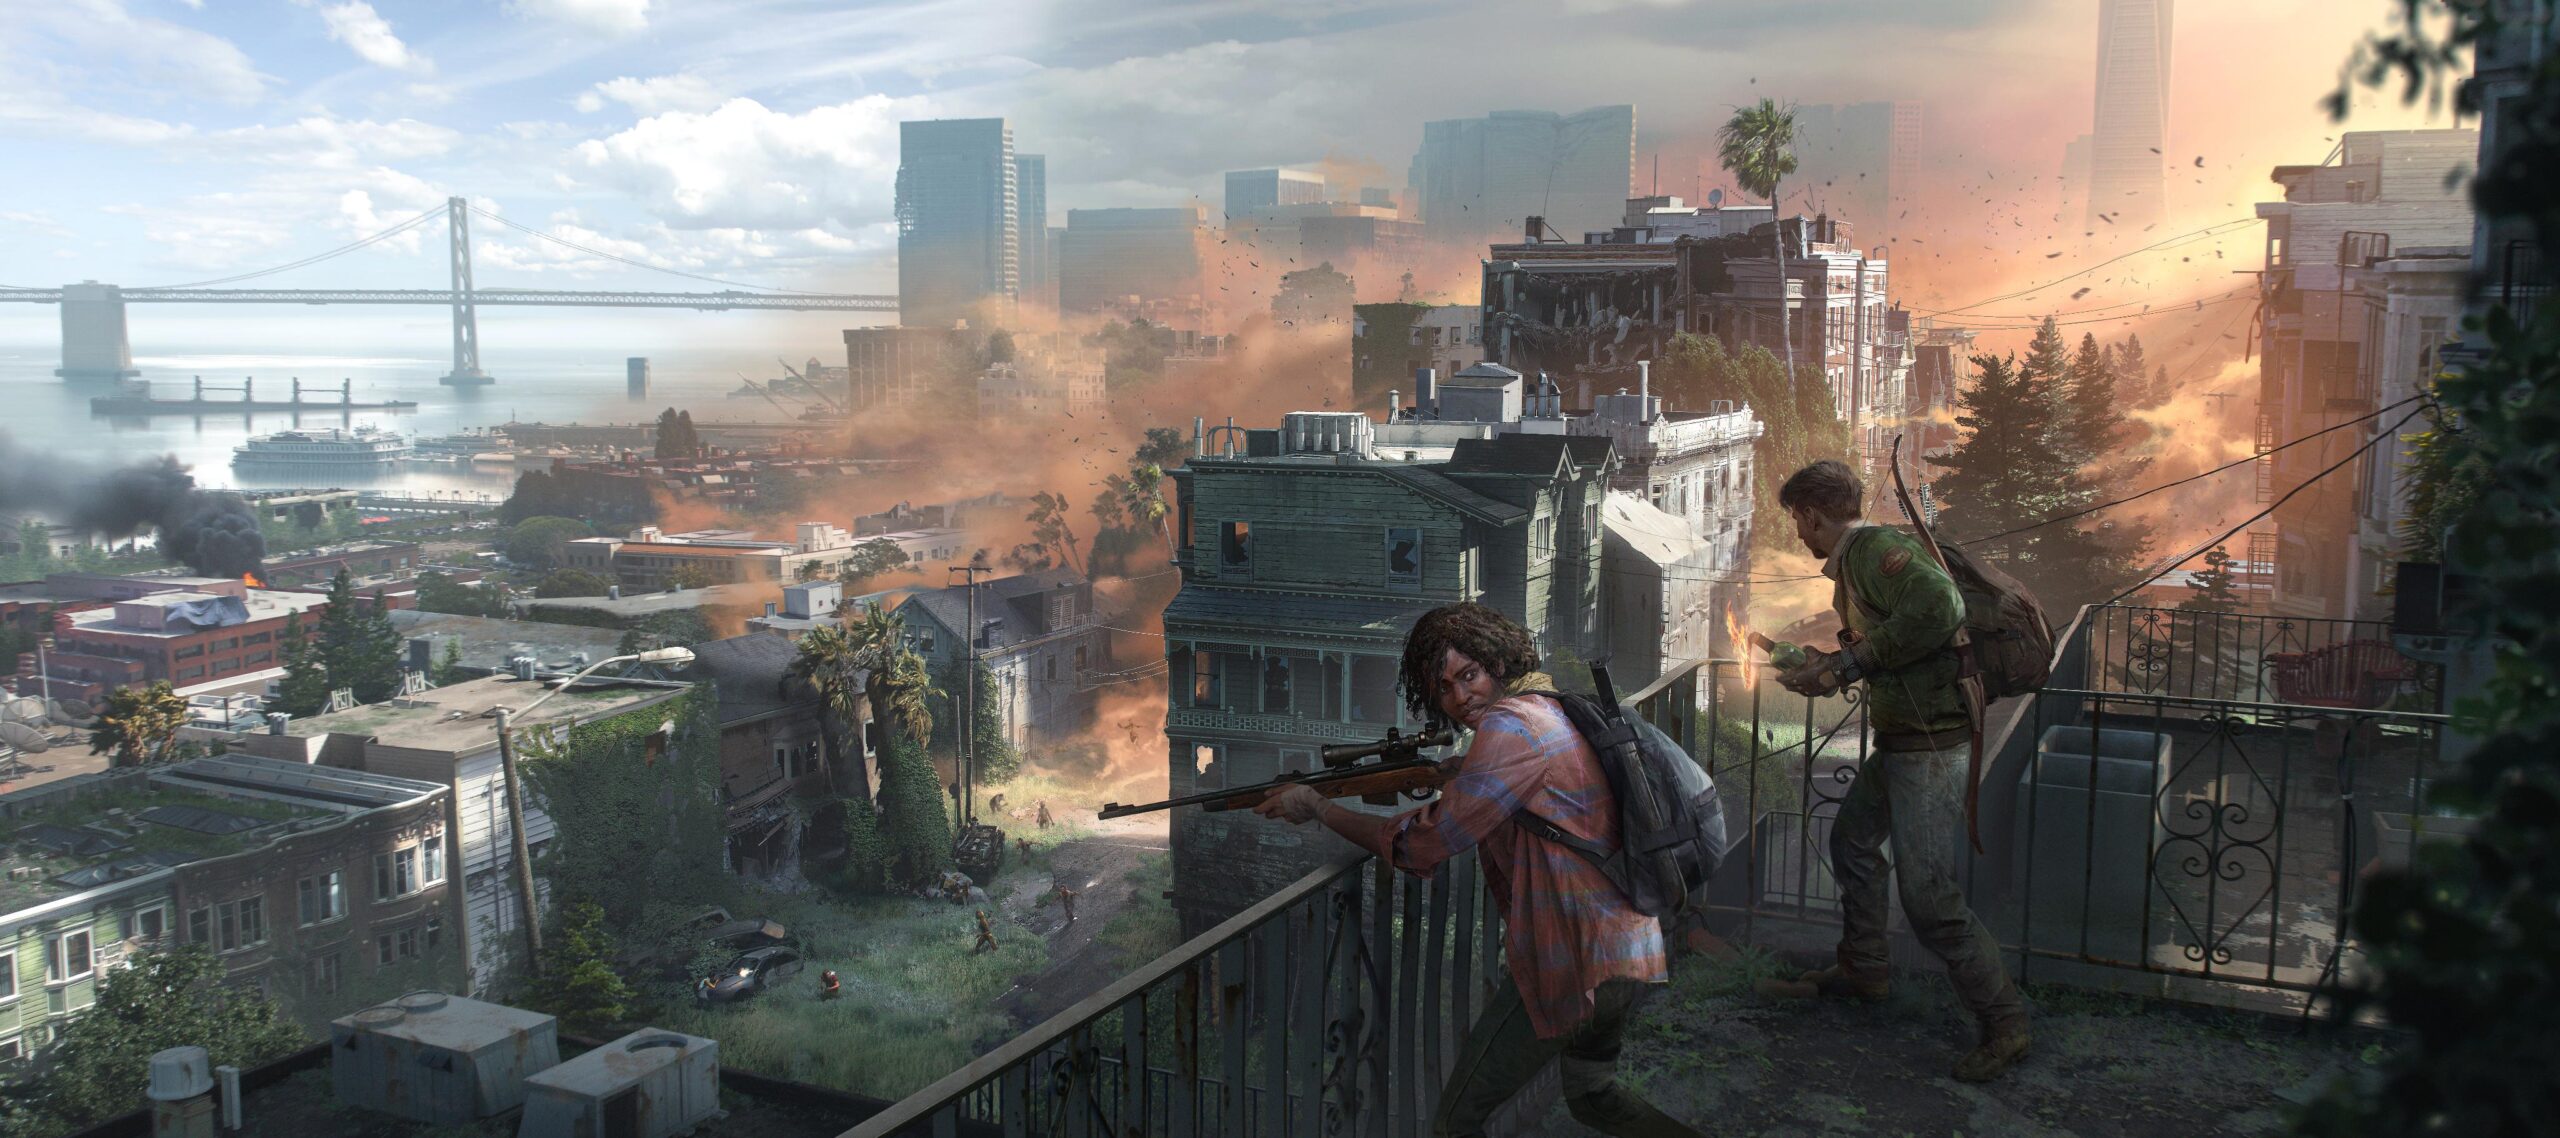 Last-of-Us-multiplayer-game-concept-art-scaled.jpg